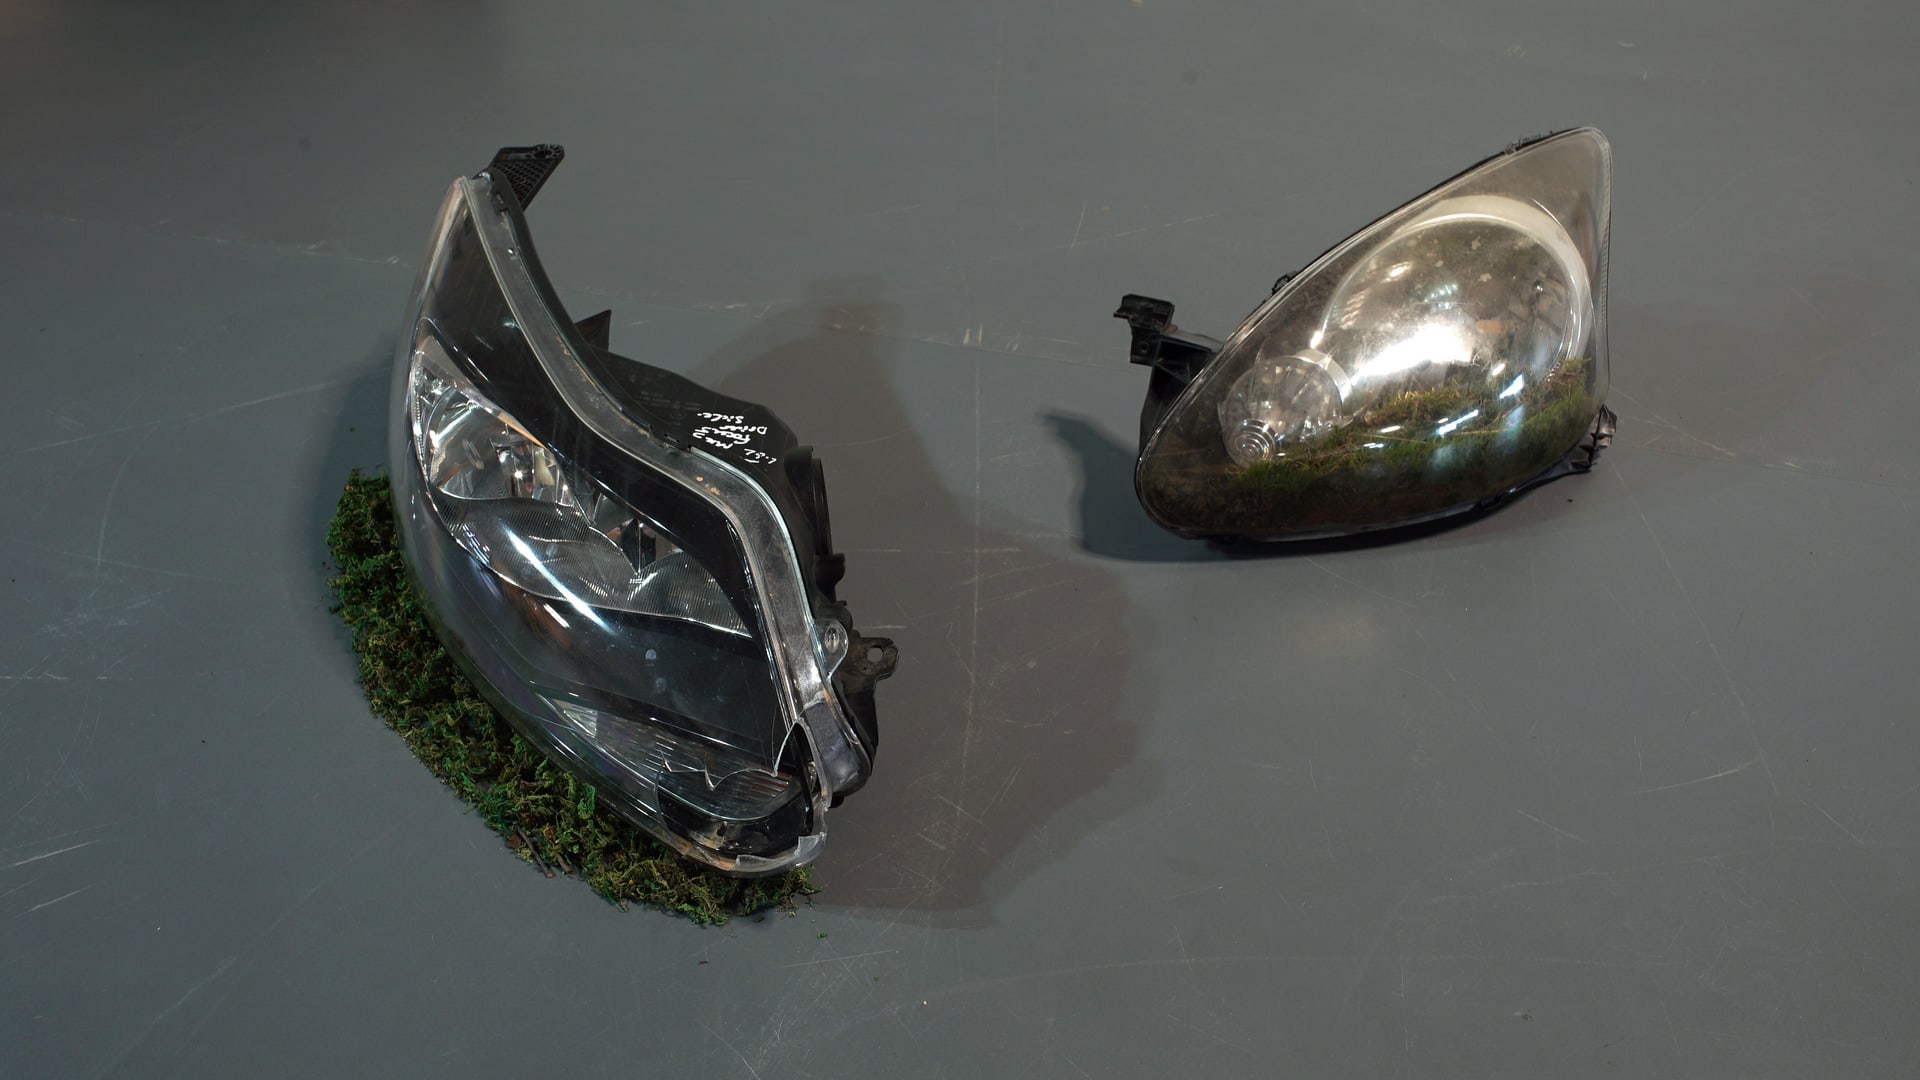 two disused car headlights, one is a live moss terrarium, the other is placed on a bed of dry, dead moss.